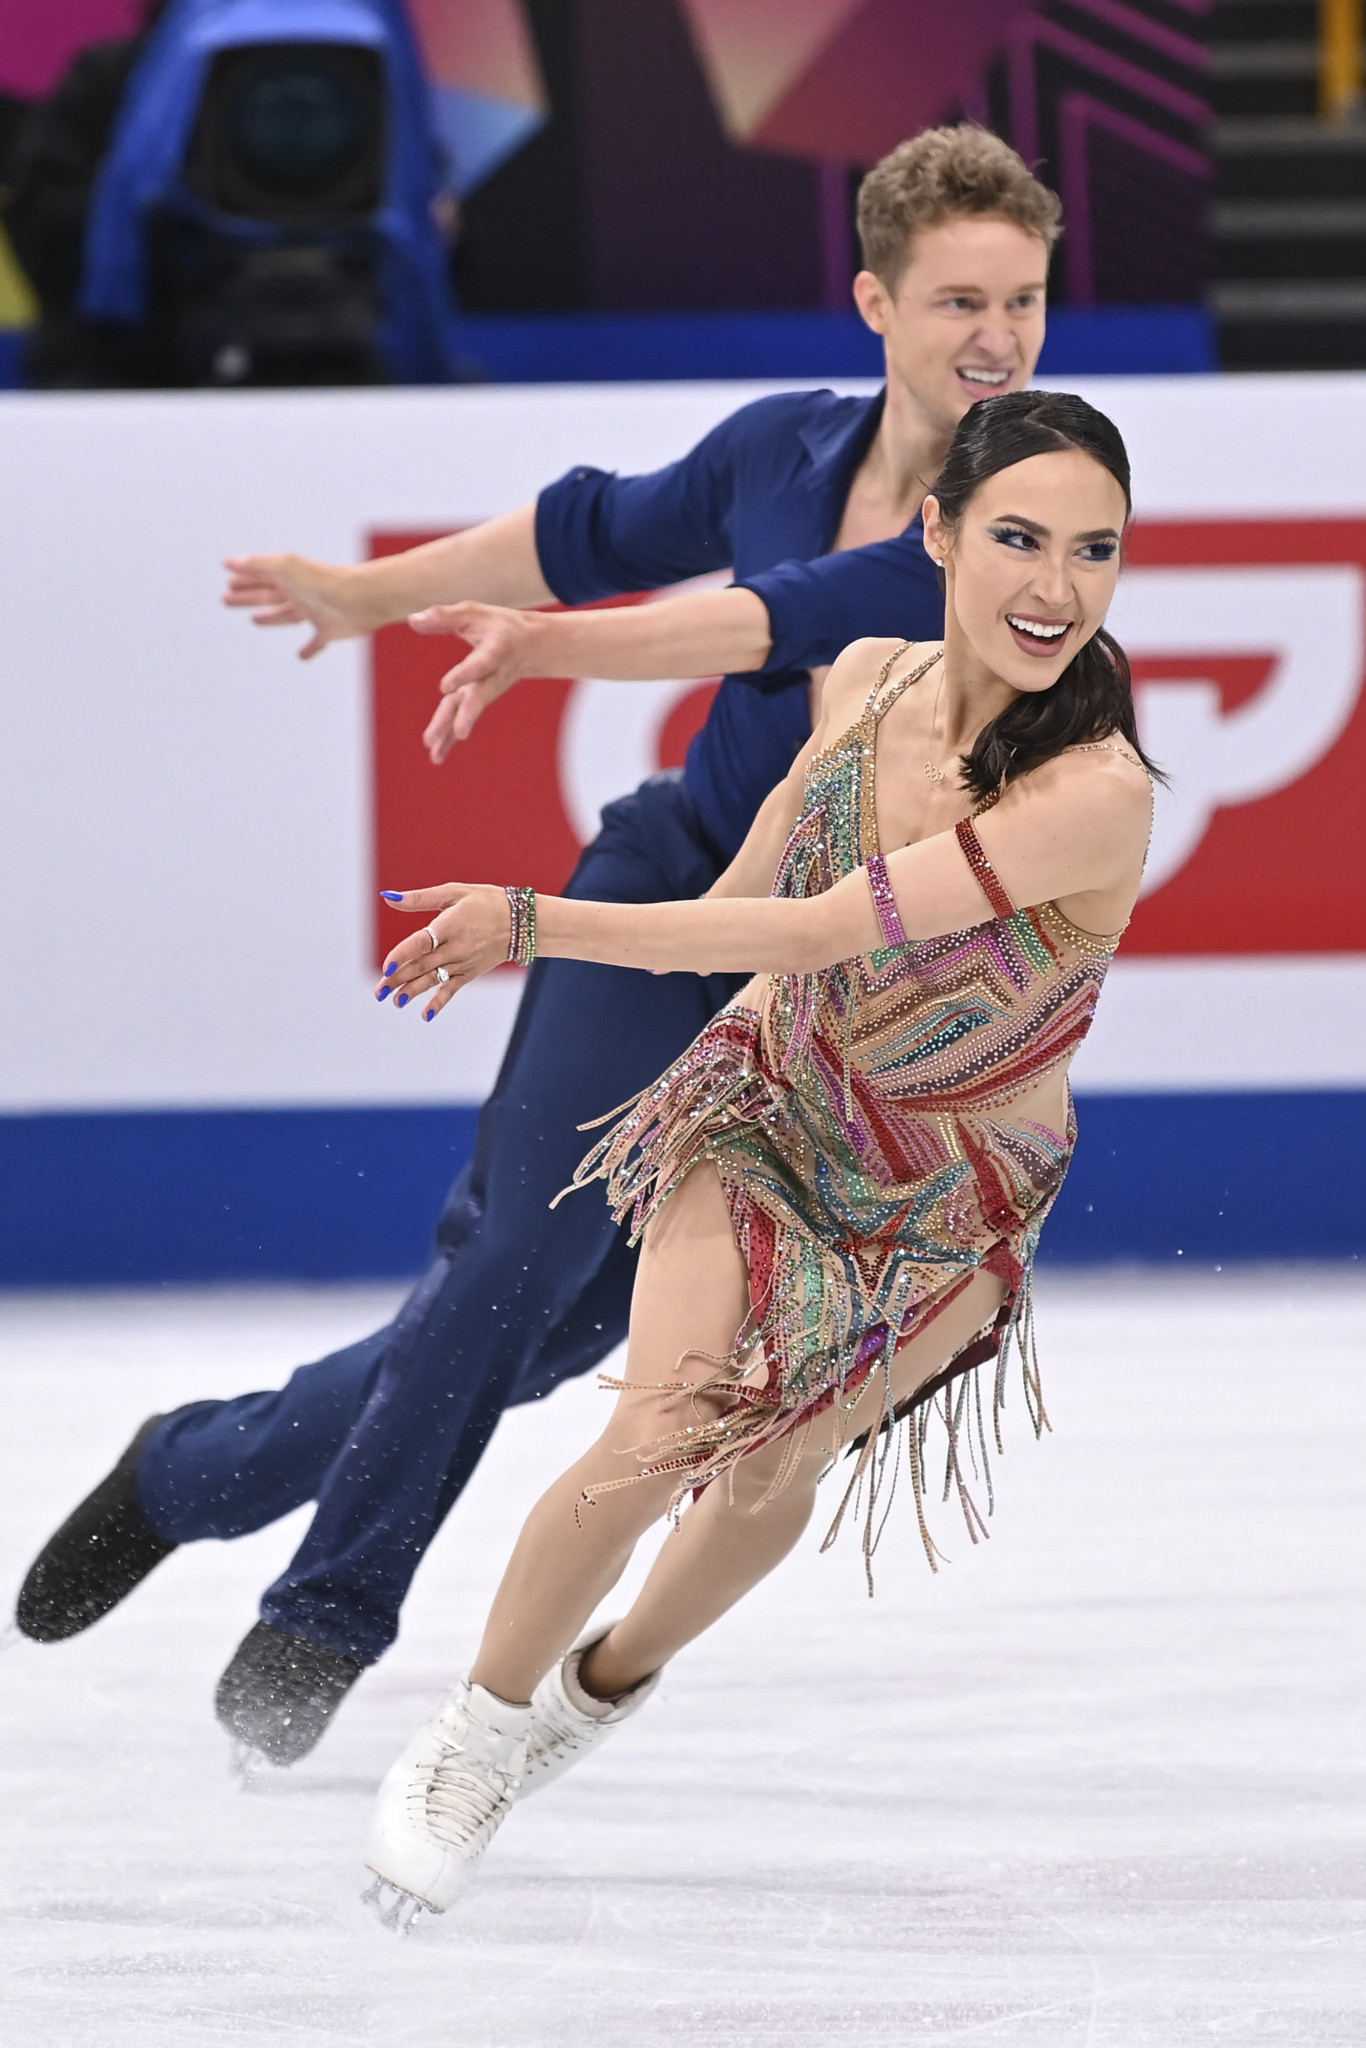 The United States' Madison Chock, front, and Evan Bates, back, earned ice dance gold on the final day of the World Championships ©Getty Images